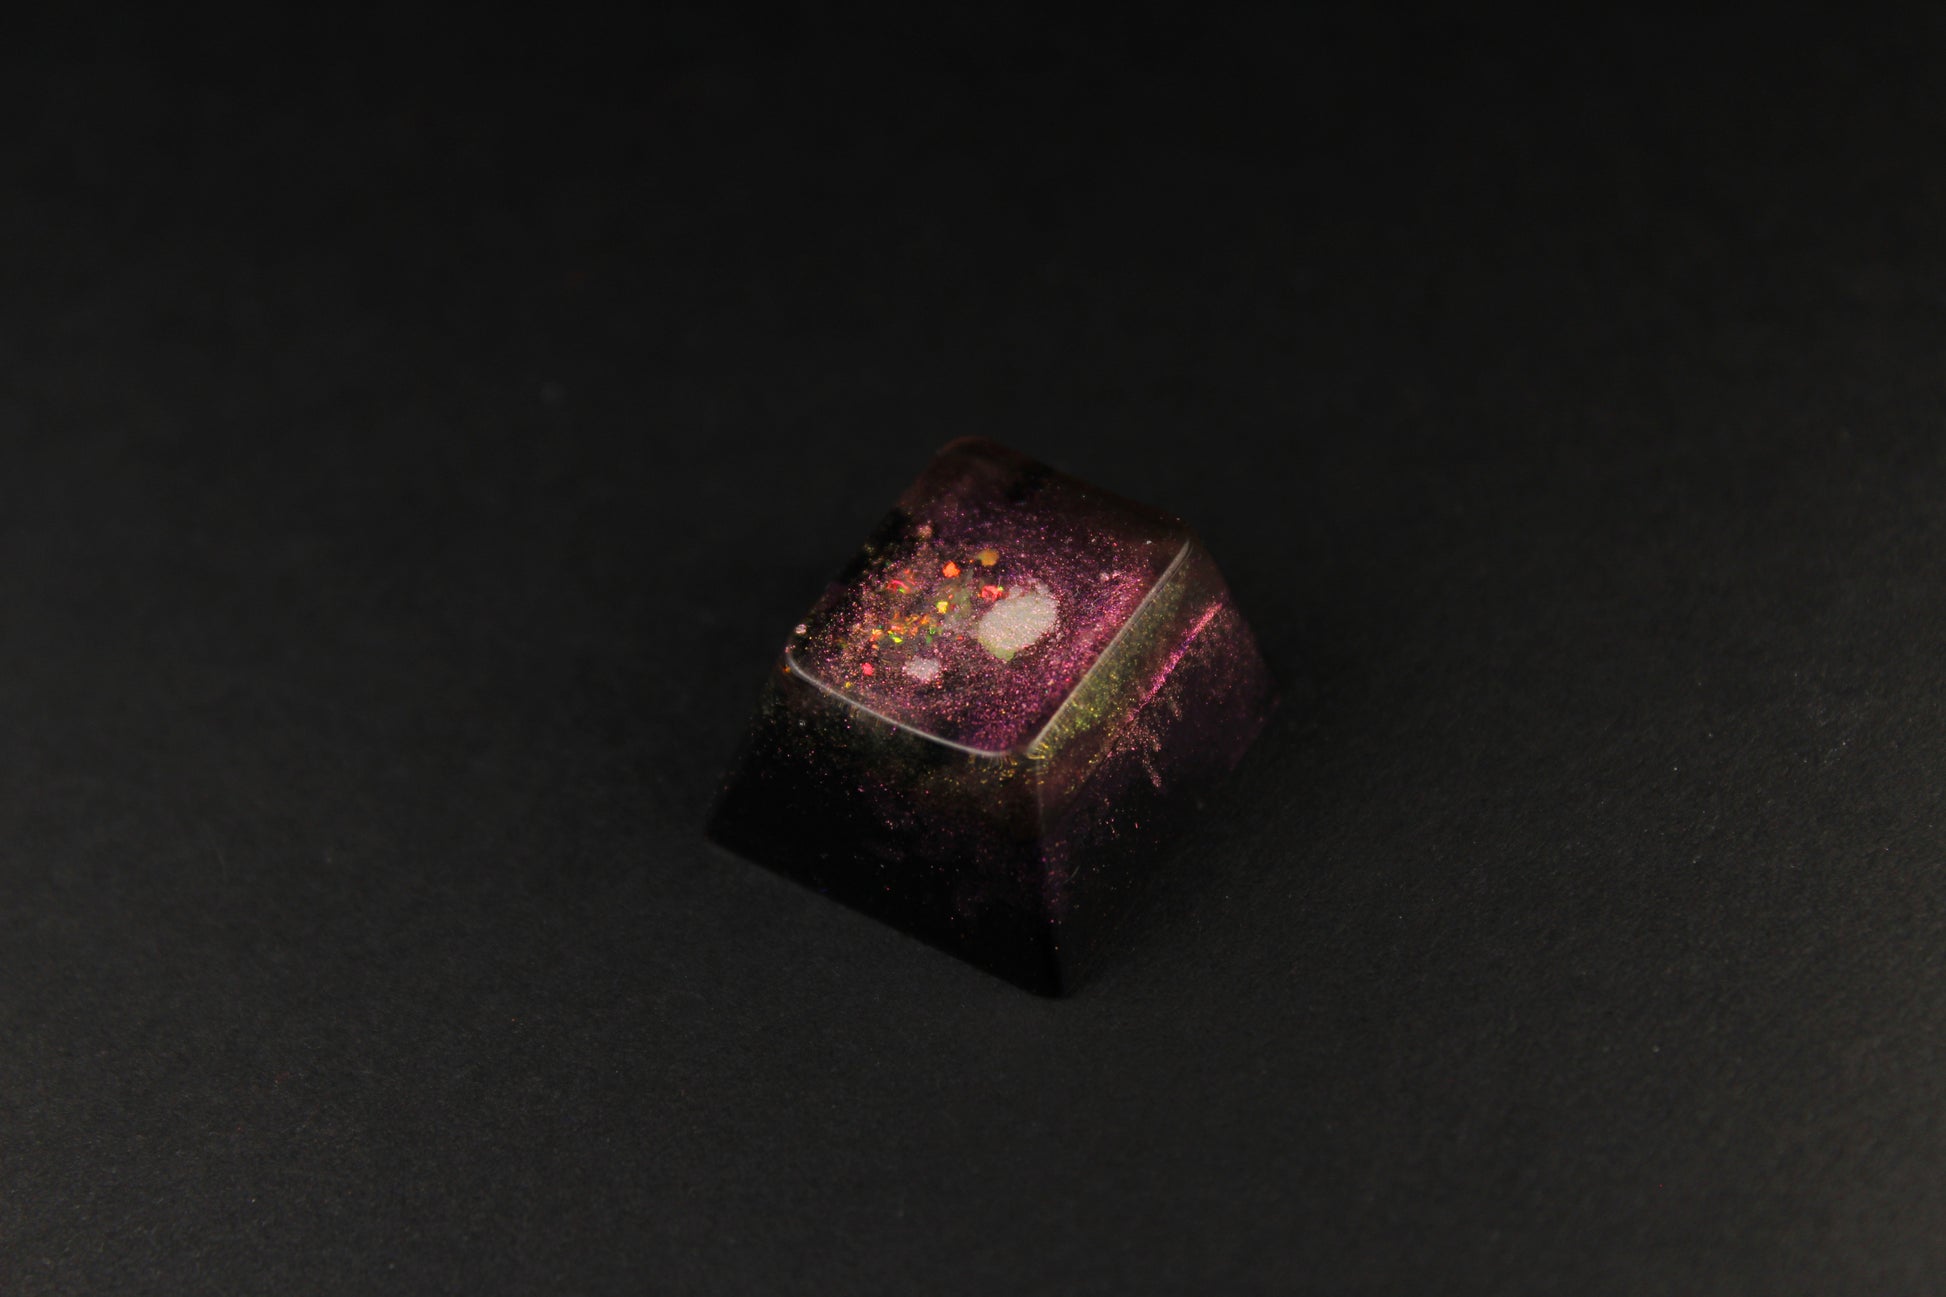 Cherry Esc - Star Shower 2 - PrimeCaps Keycap - Blank and Sculpted Artisan Keycaps for cherry MX mechanical keyboards 